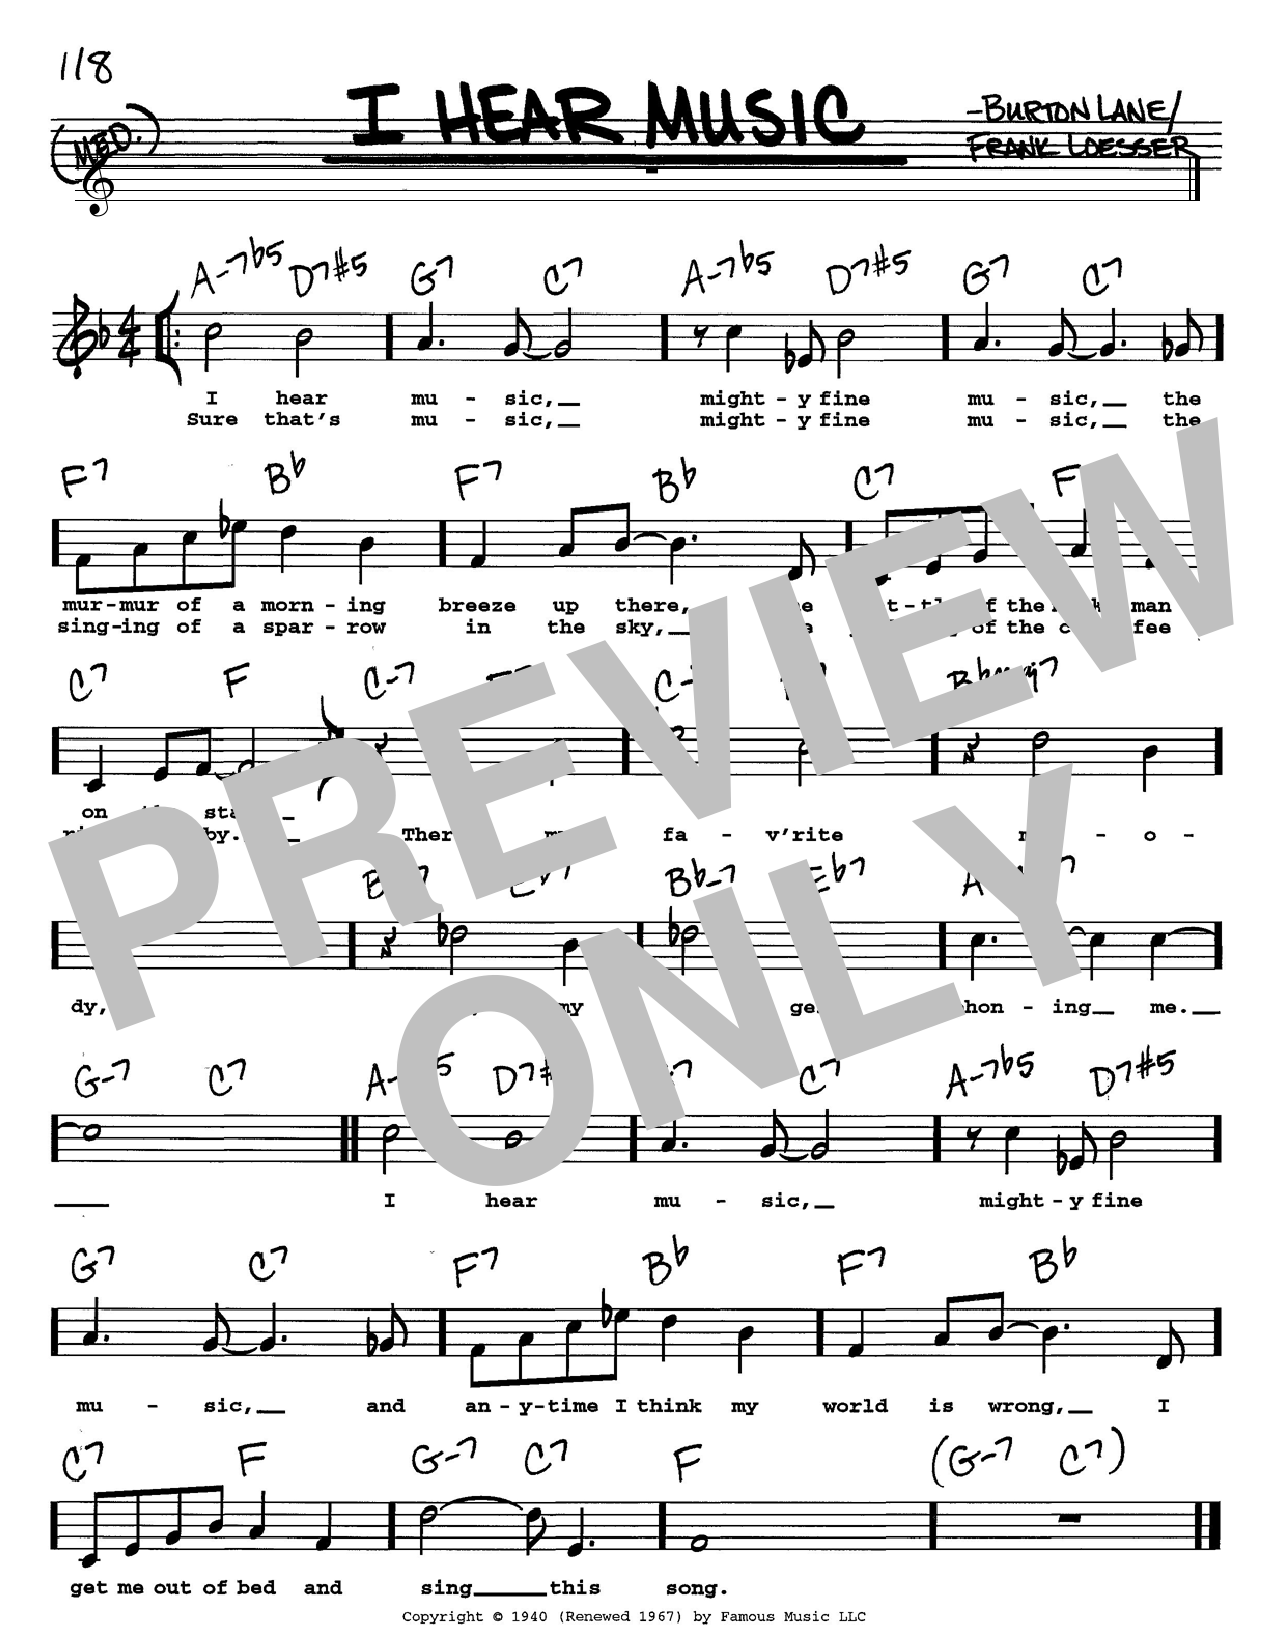 Frank Loesser I Hear Music sheet music notes and chords. Download Printable PDF.